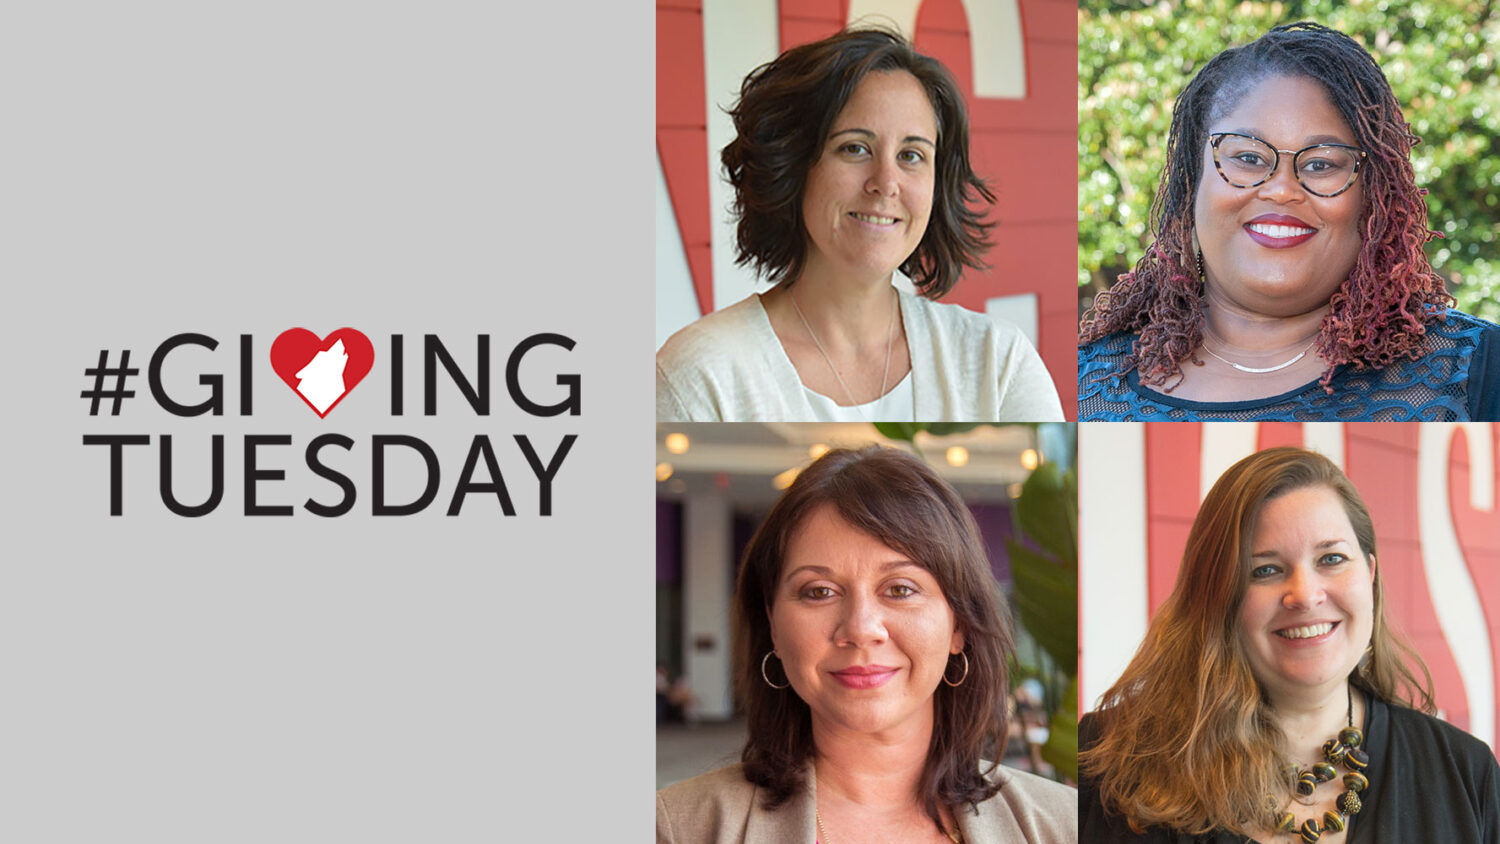 Giving Tuesday message from the four Campus Community Center directors